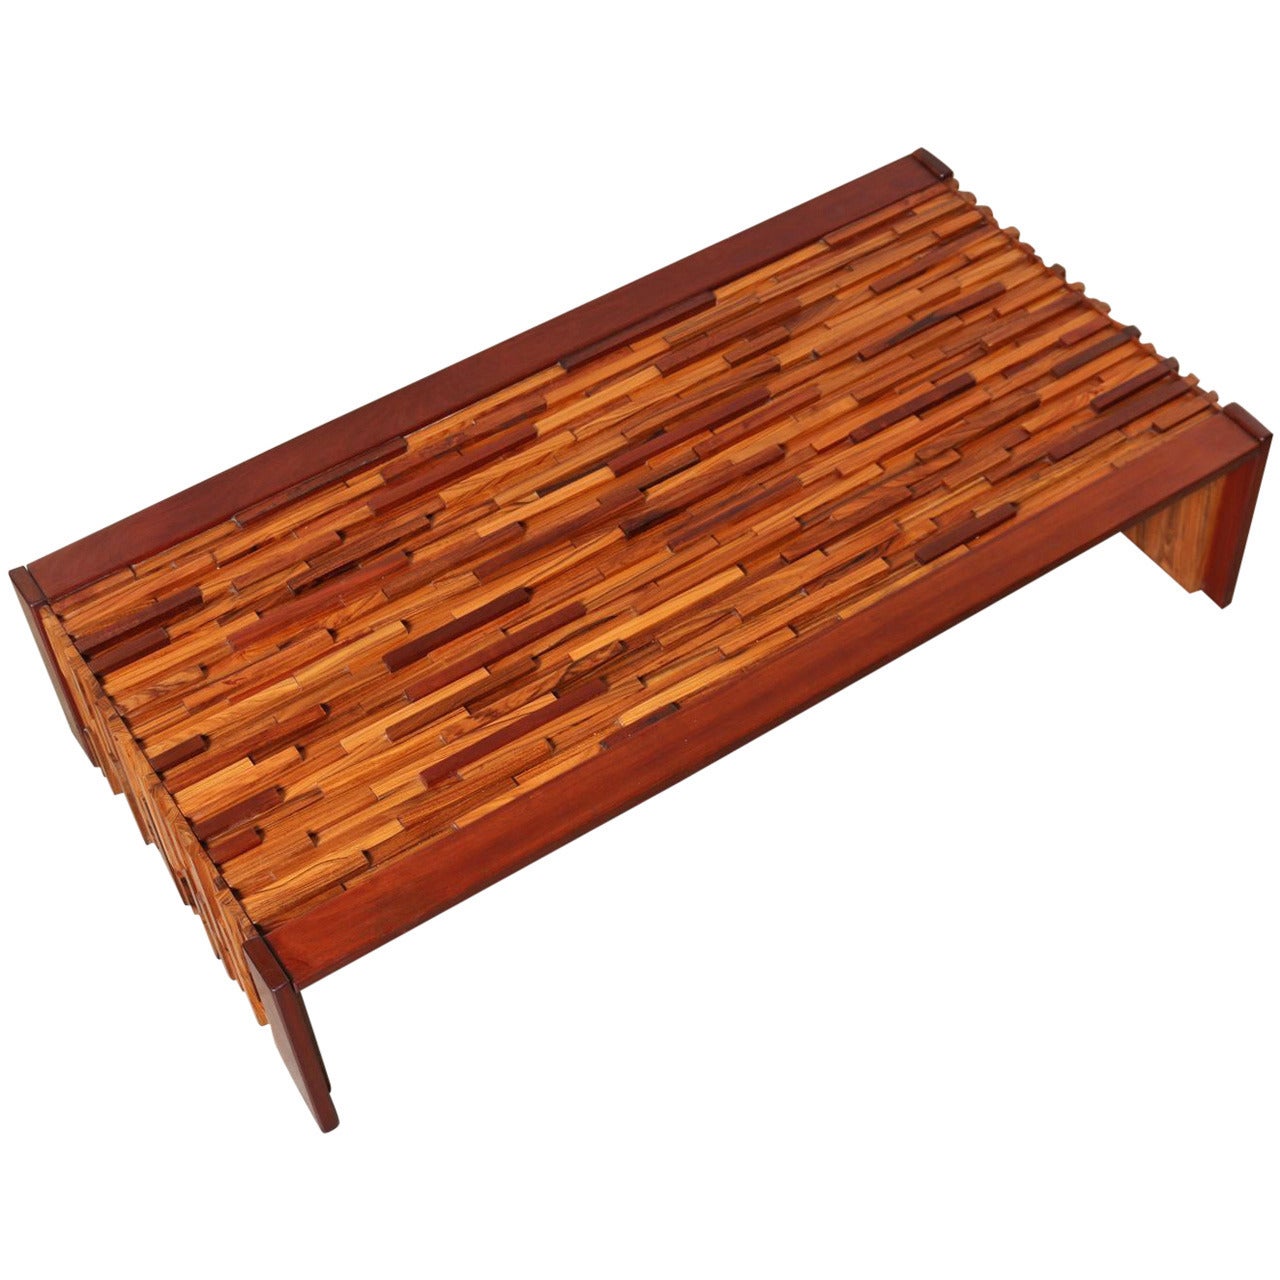 Percival Lafer Jacaranda, Rosewood and Glass Coffee Table, Brazil, 1960s